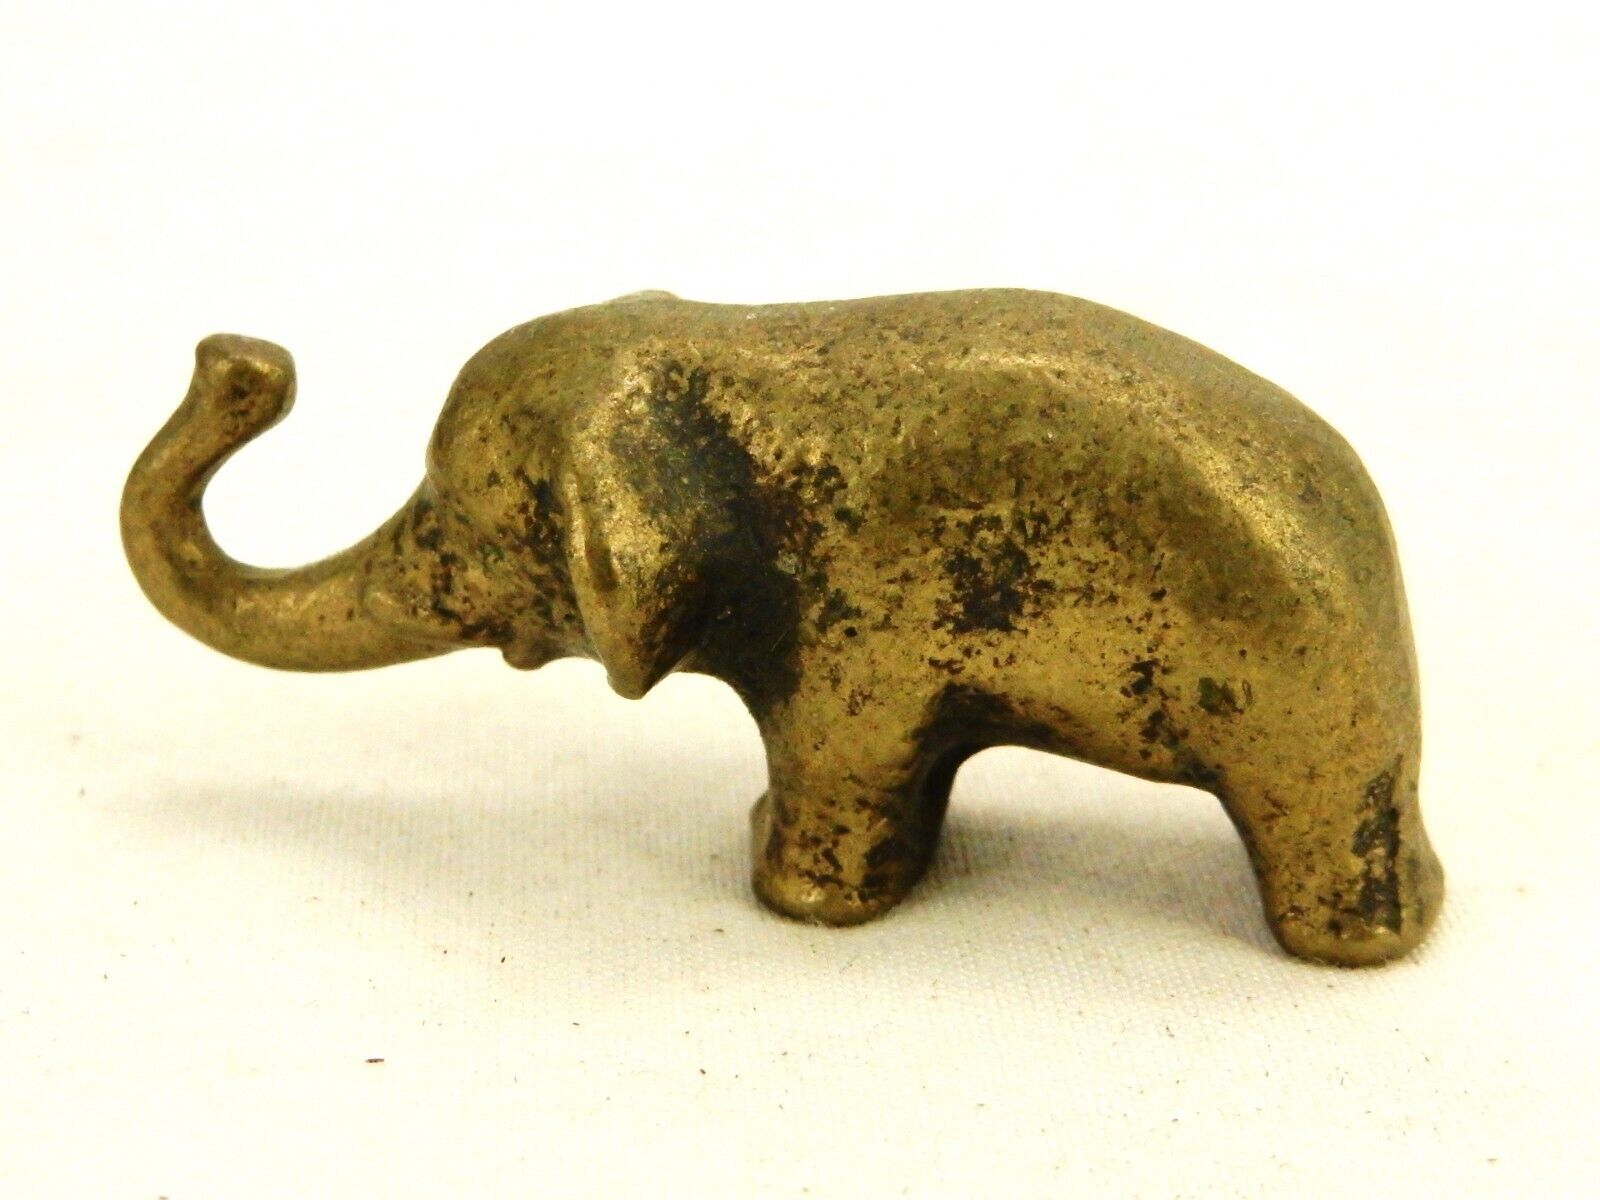 Primary image for Solid Brass Figurine/Paperweight, 2 Oz. Good Luck Elephant w/Trunk Up, #ELP-03